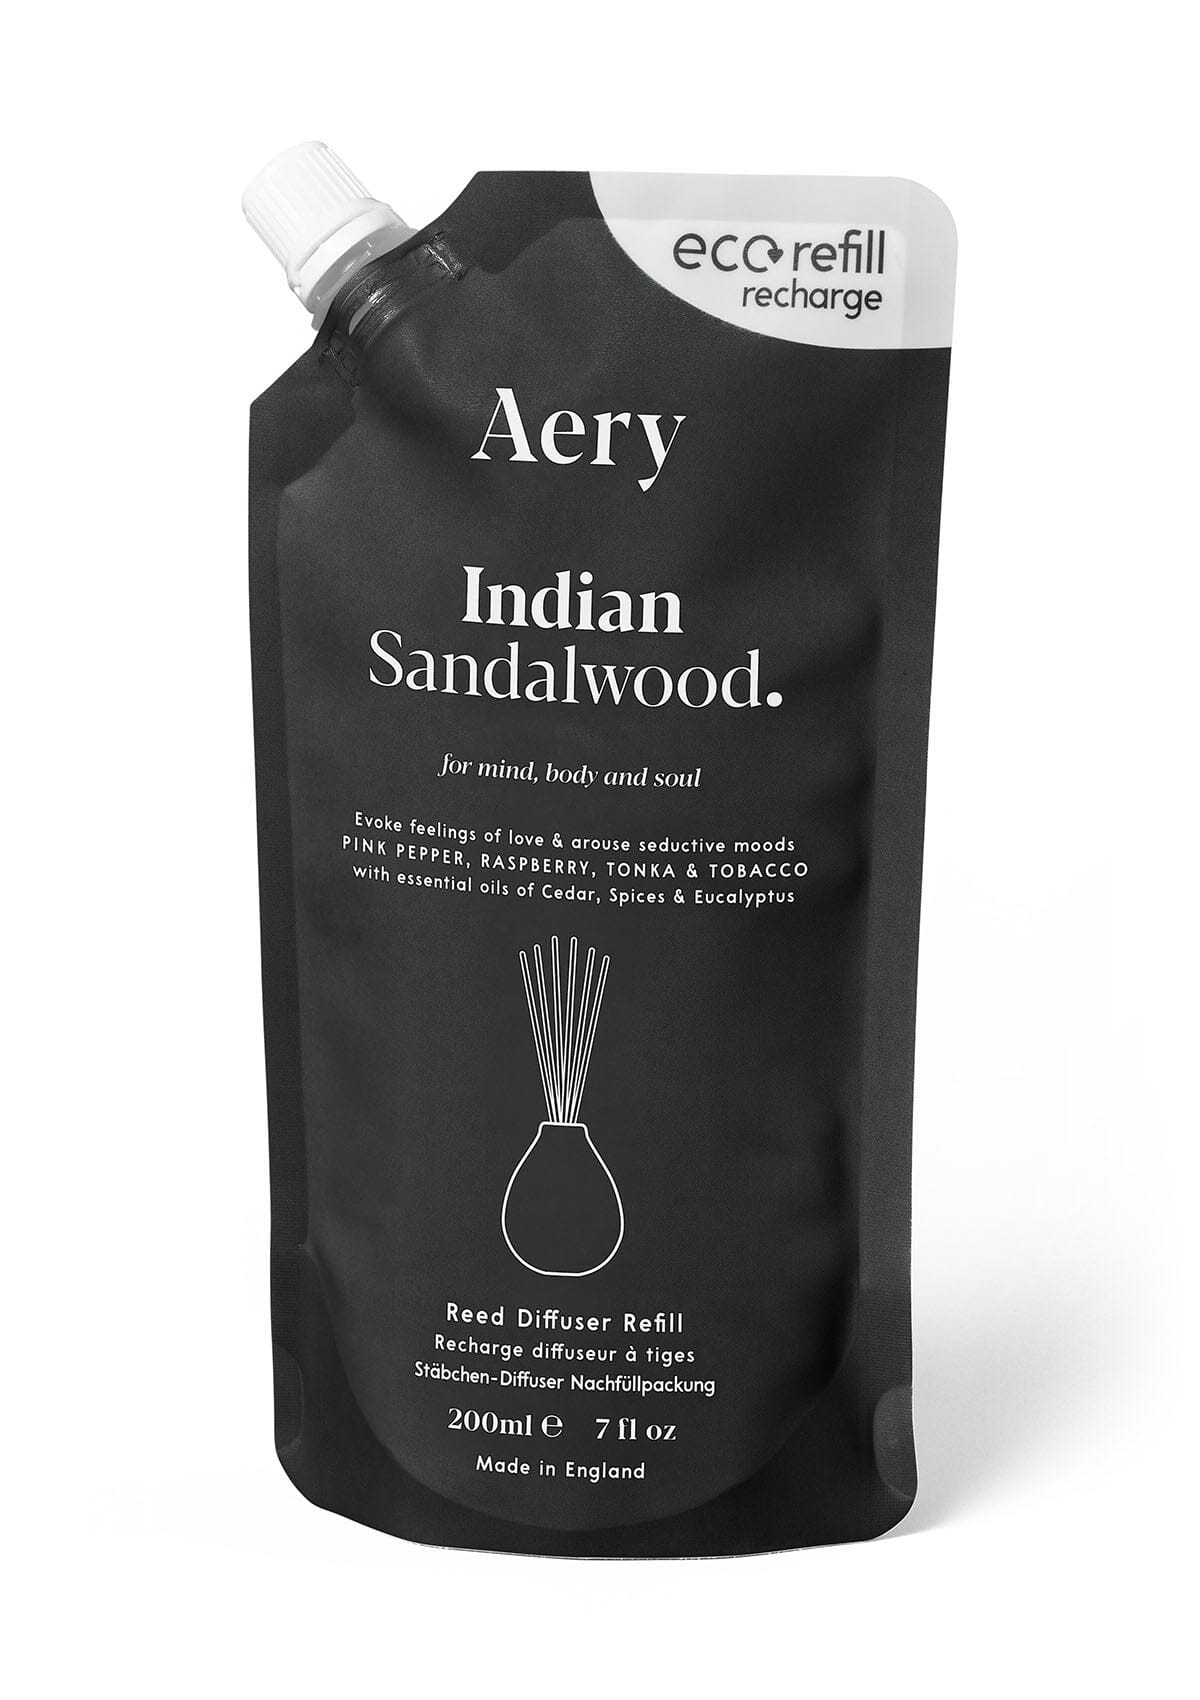 Black Indian sandalwood reed diffuser refill pouch by aery displayed on white background 